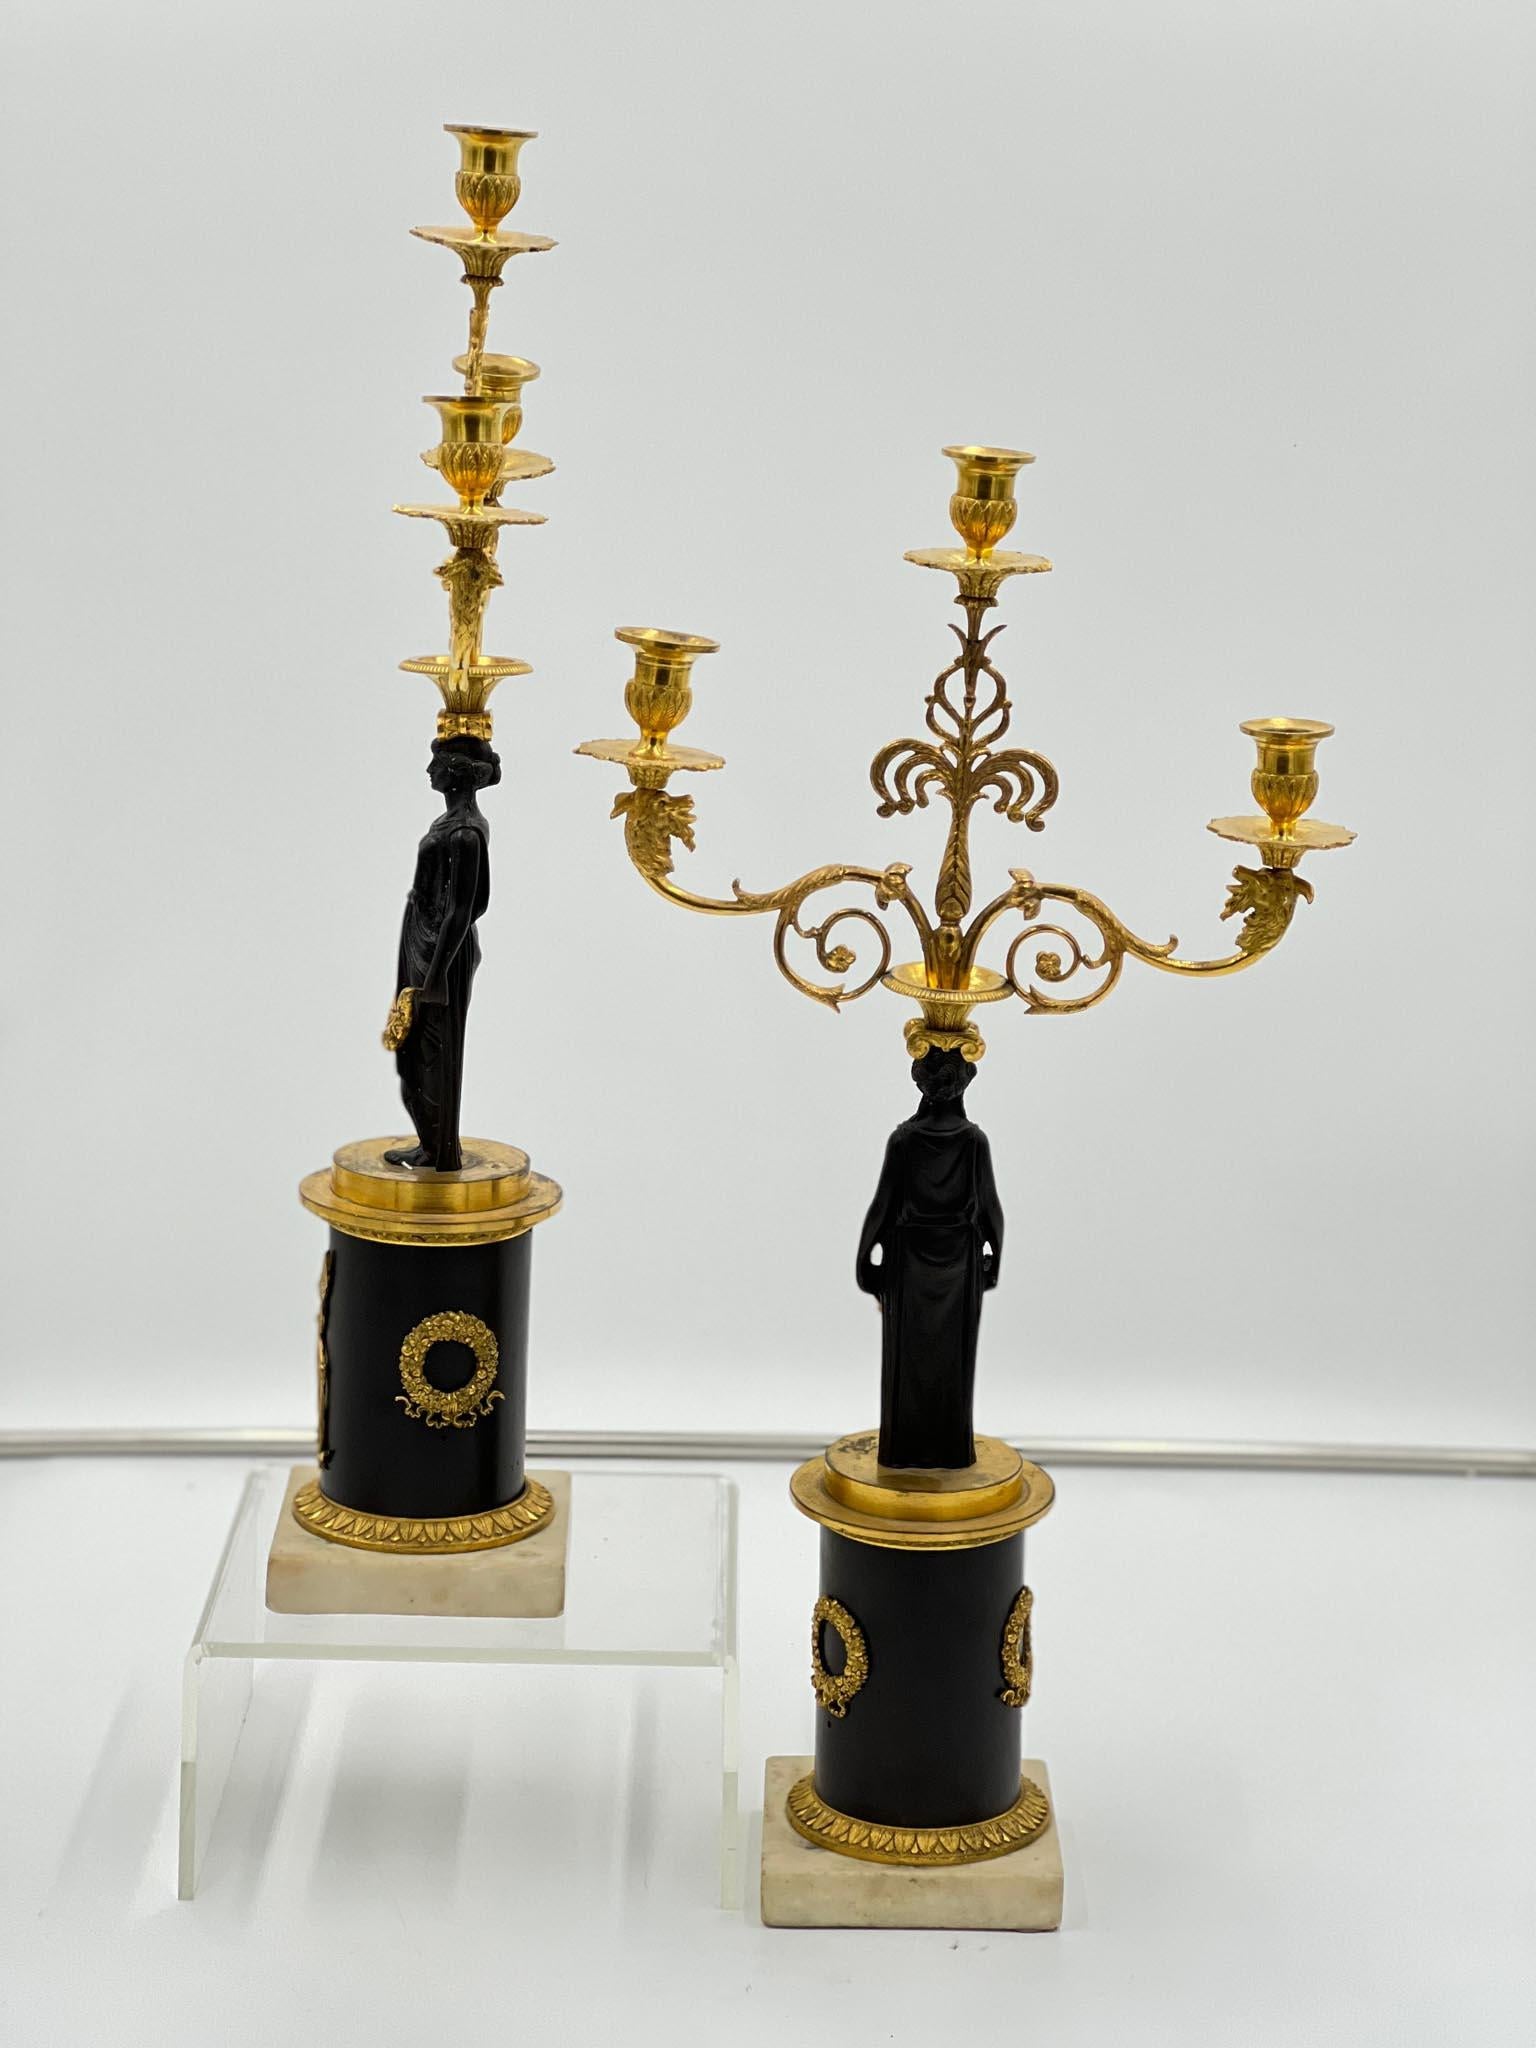 Early 19th Century English Regency Ormolu and Marble Candelabra. Gorgeous piece.